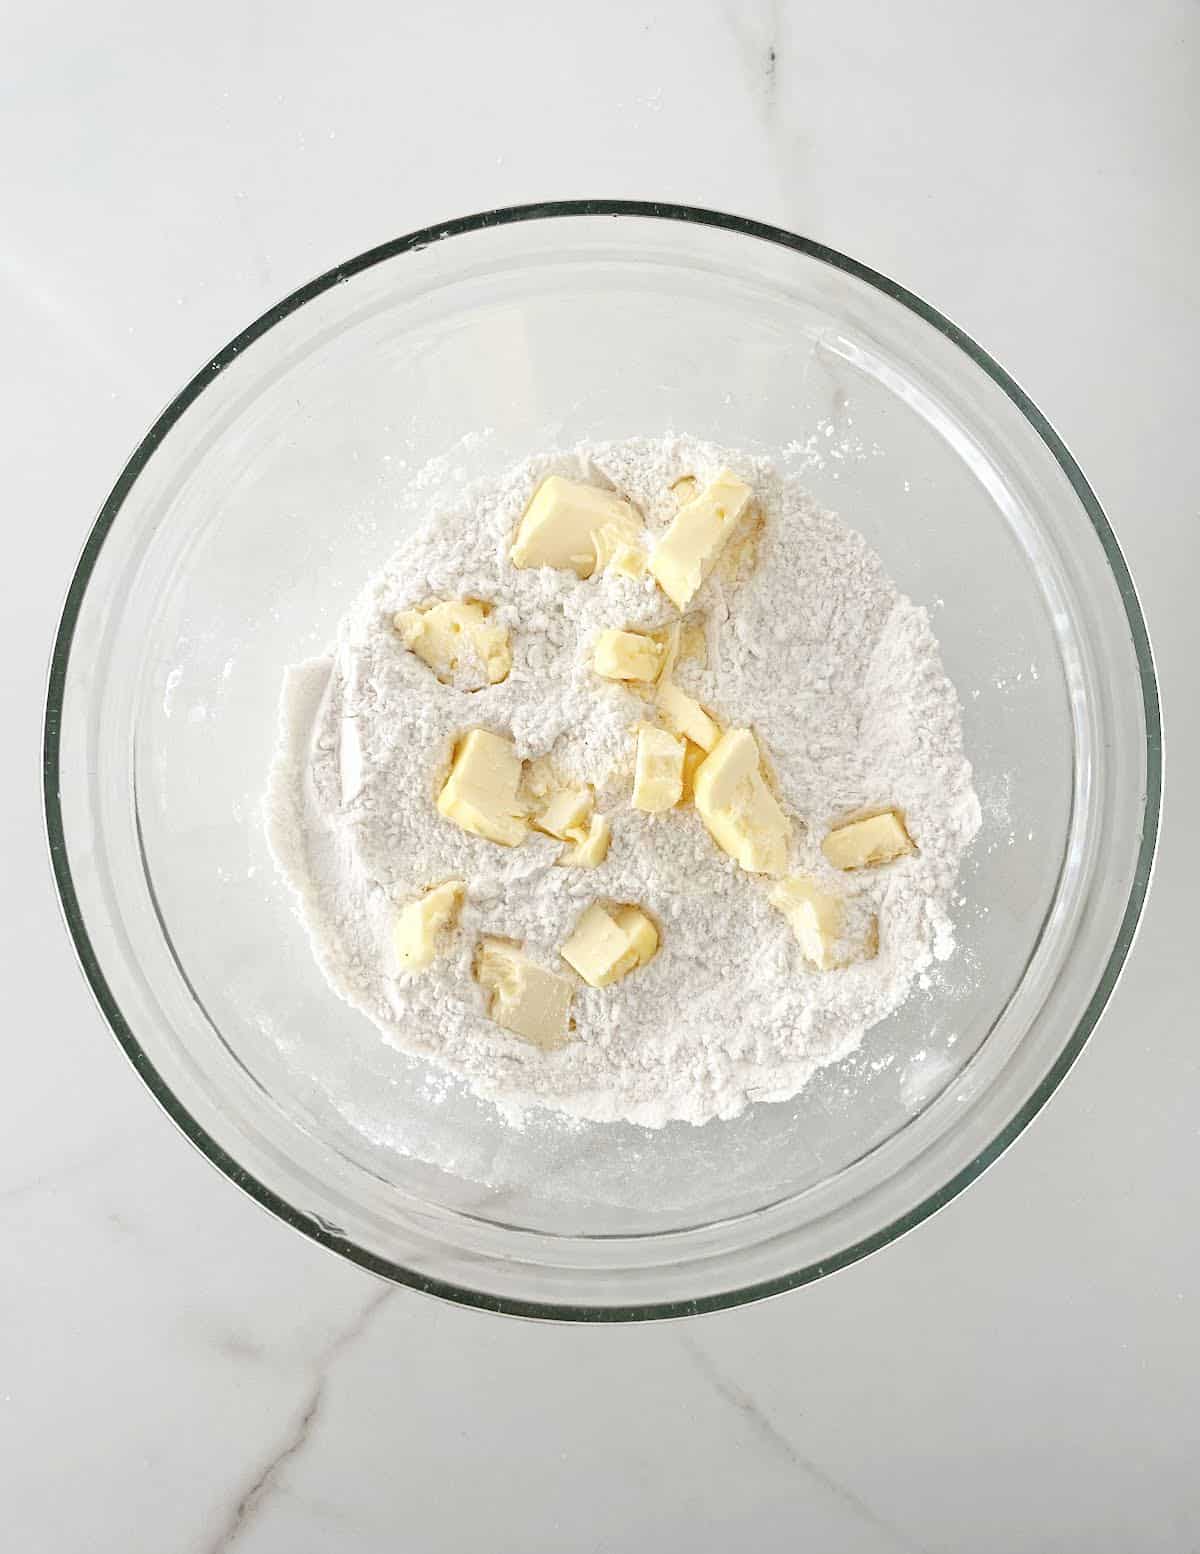 Top view of glass bowl on white marble with flour and butter pieces.